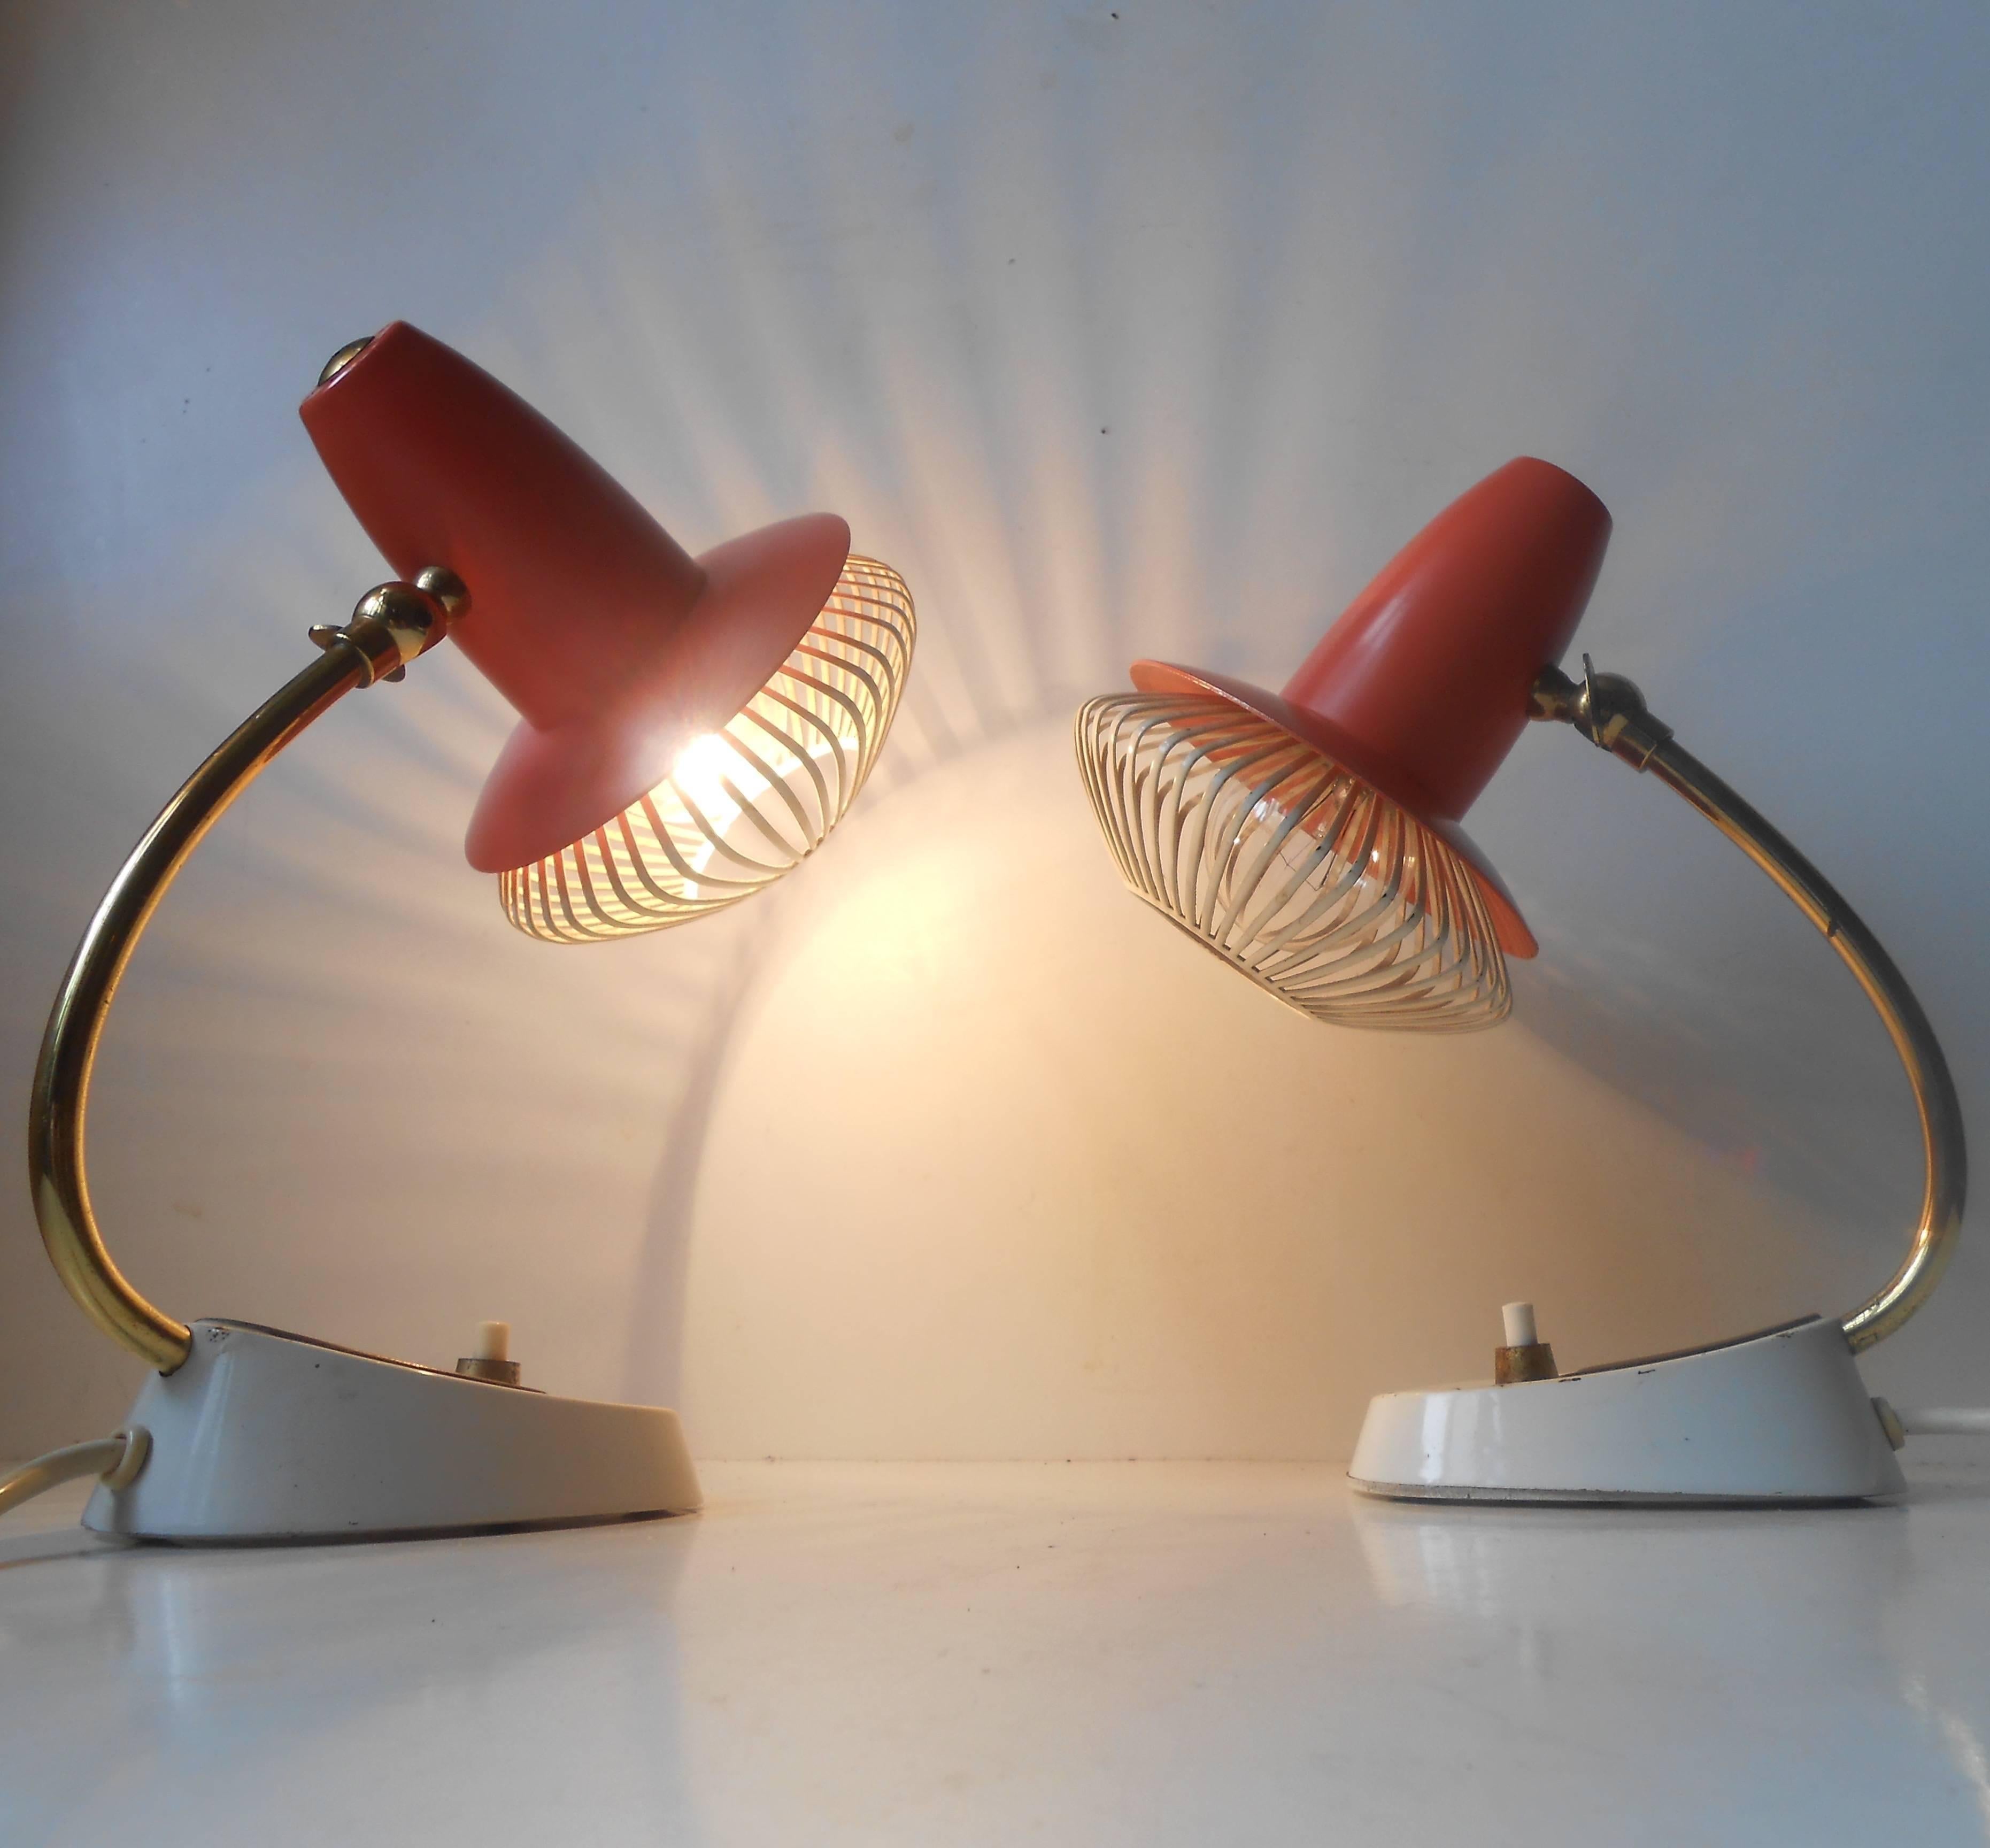 Patinated Pair of Adjustable Red Table Lamps, Stilnovo Style, Possibly Swiss, ca. 1958-60